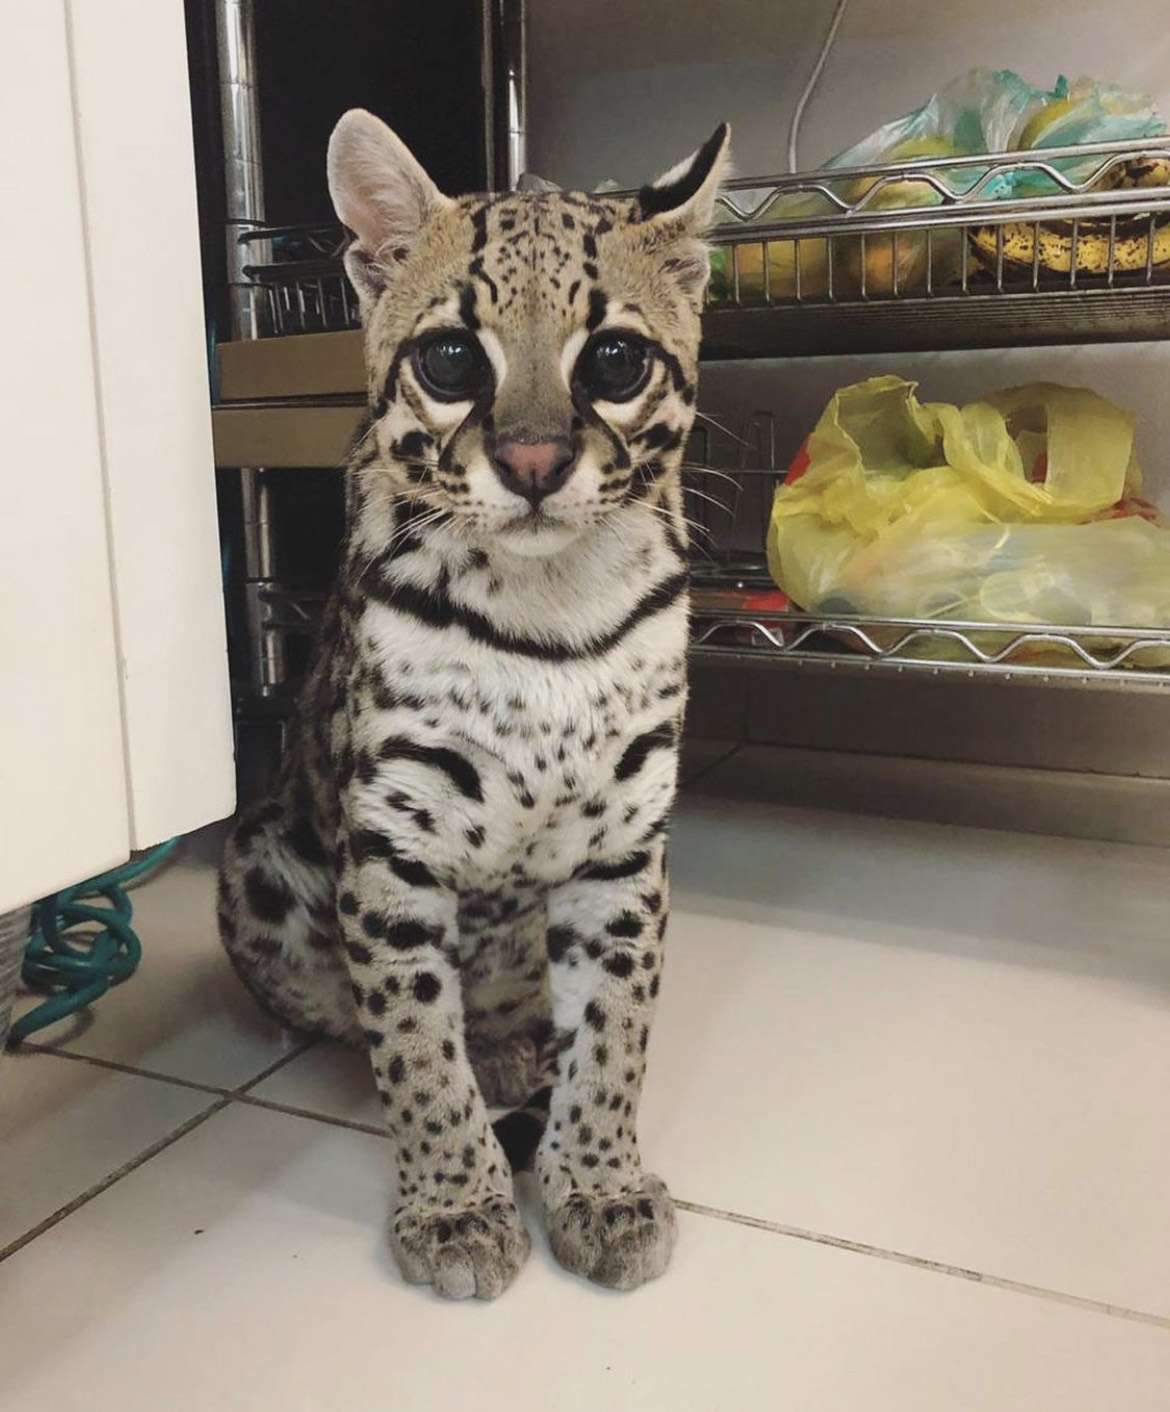 Bengal cats for sale, ocelot kittens as pets, buy a serval kitten, buy a serval cat, buy savannah kitten